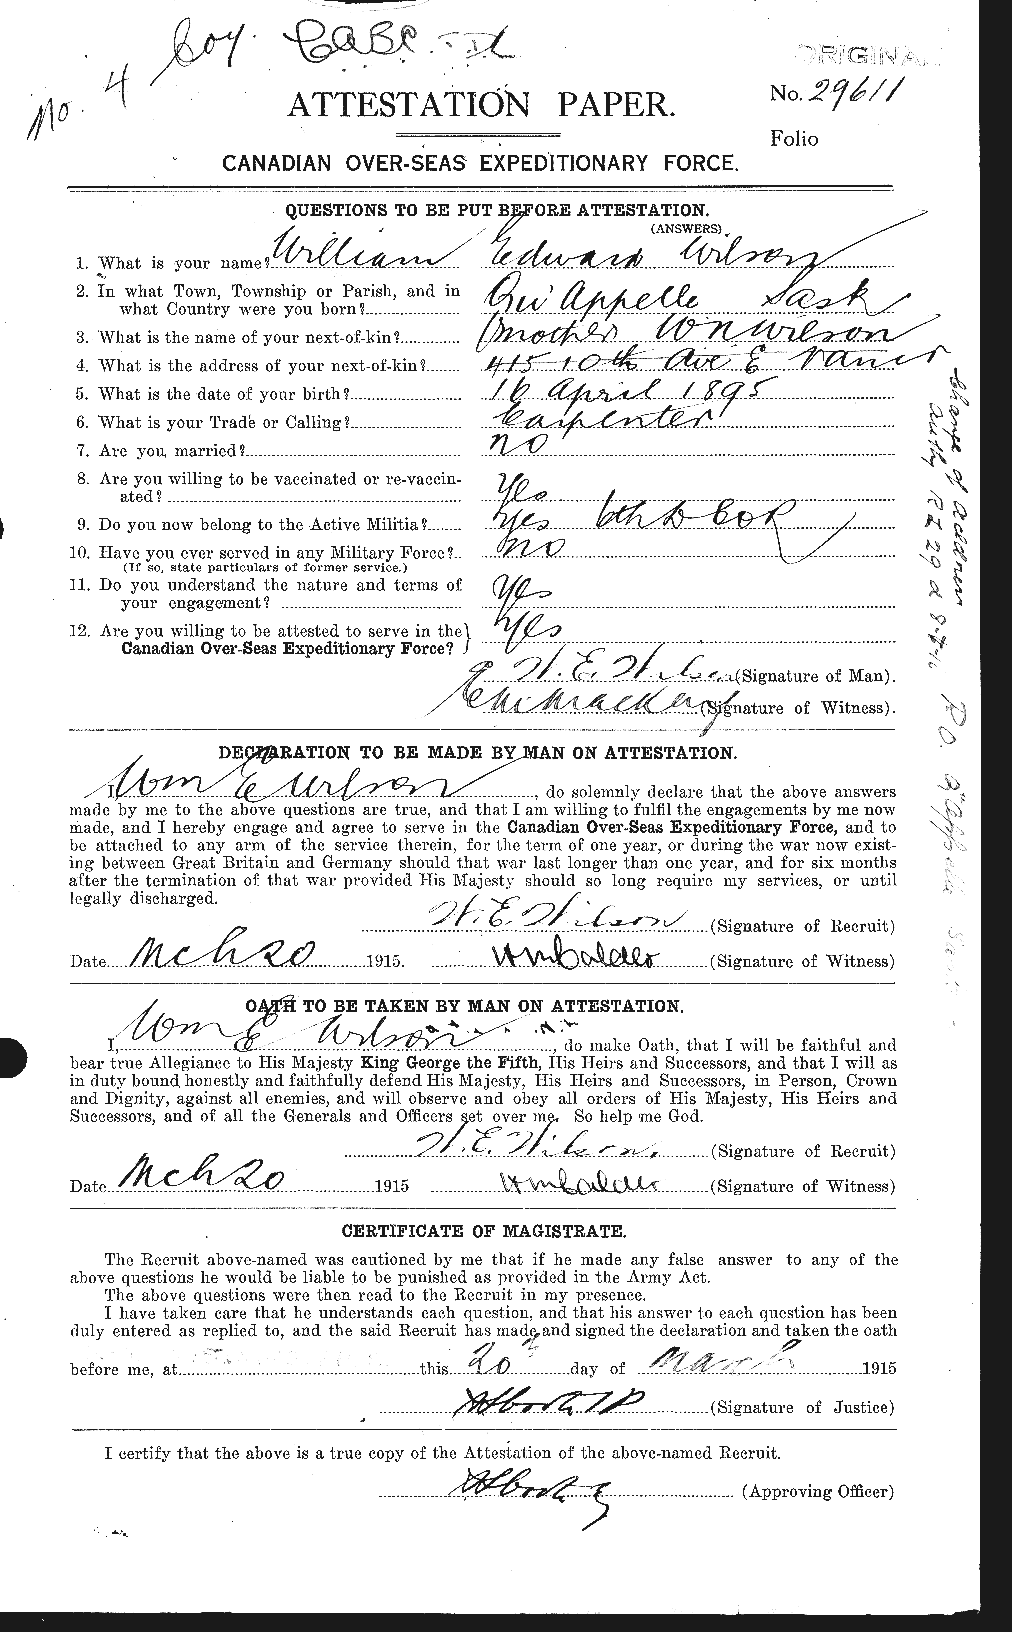 Personnel Records of the First World War - CEF 681978a